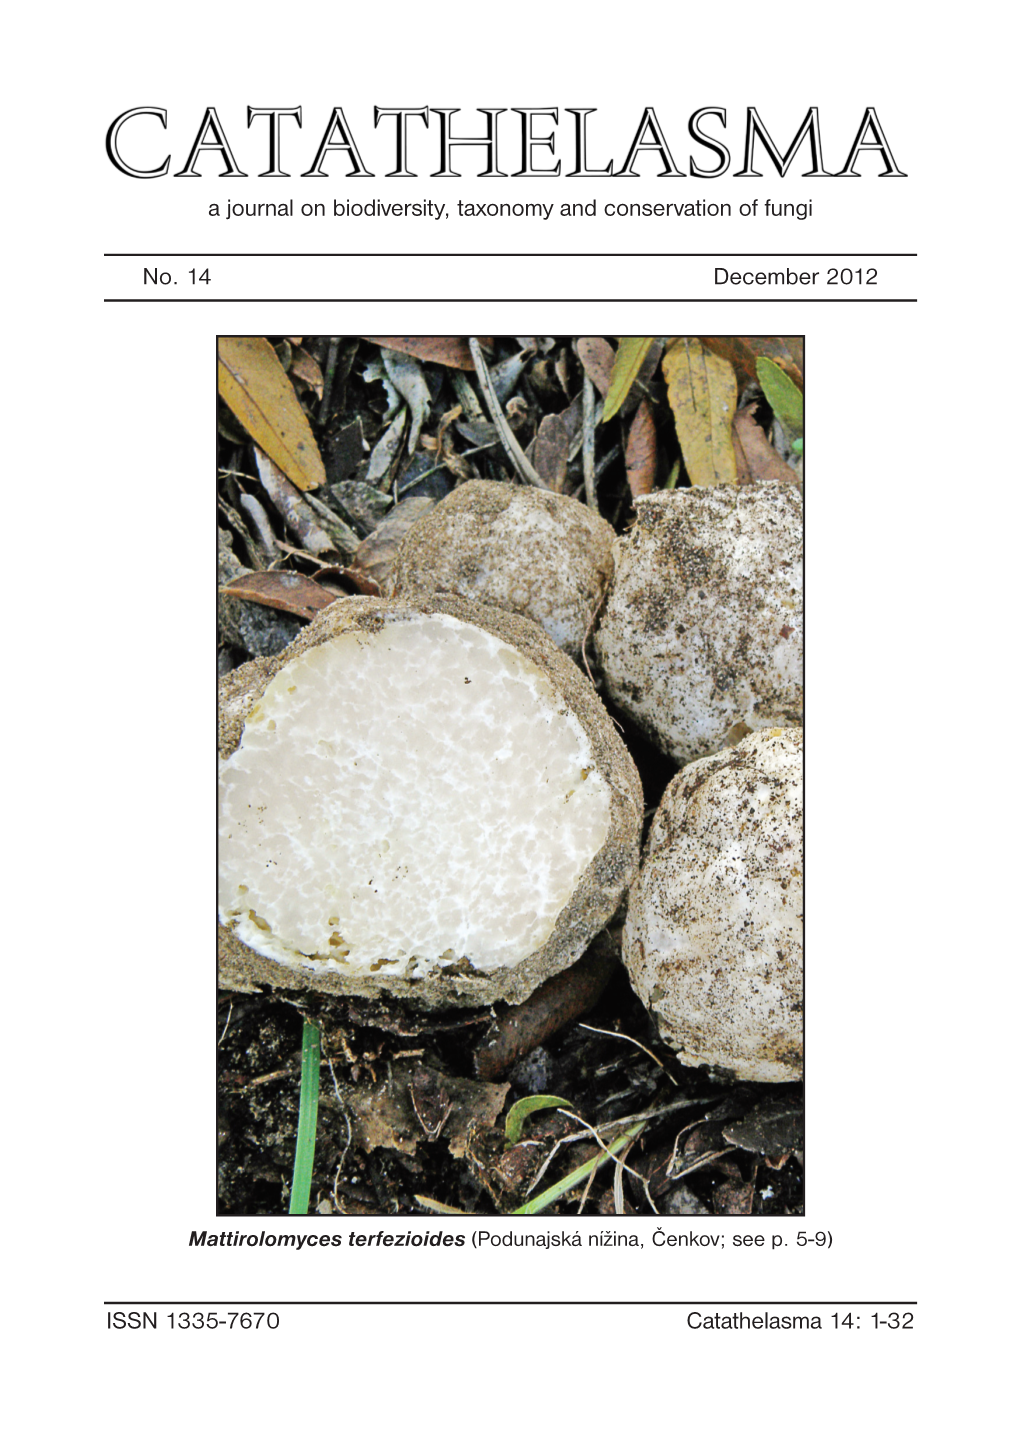 1-32 No. 14 December 2012 a Journal on Biodiversity, Taxonomy And